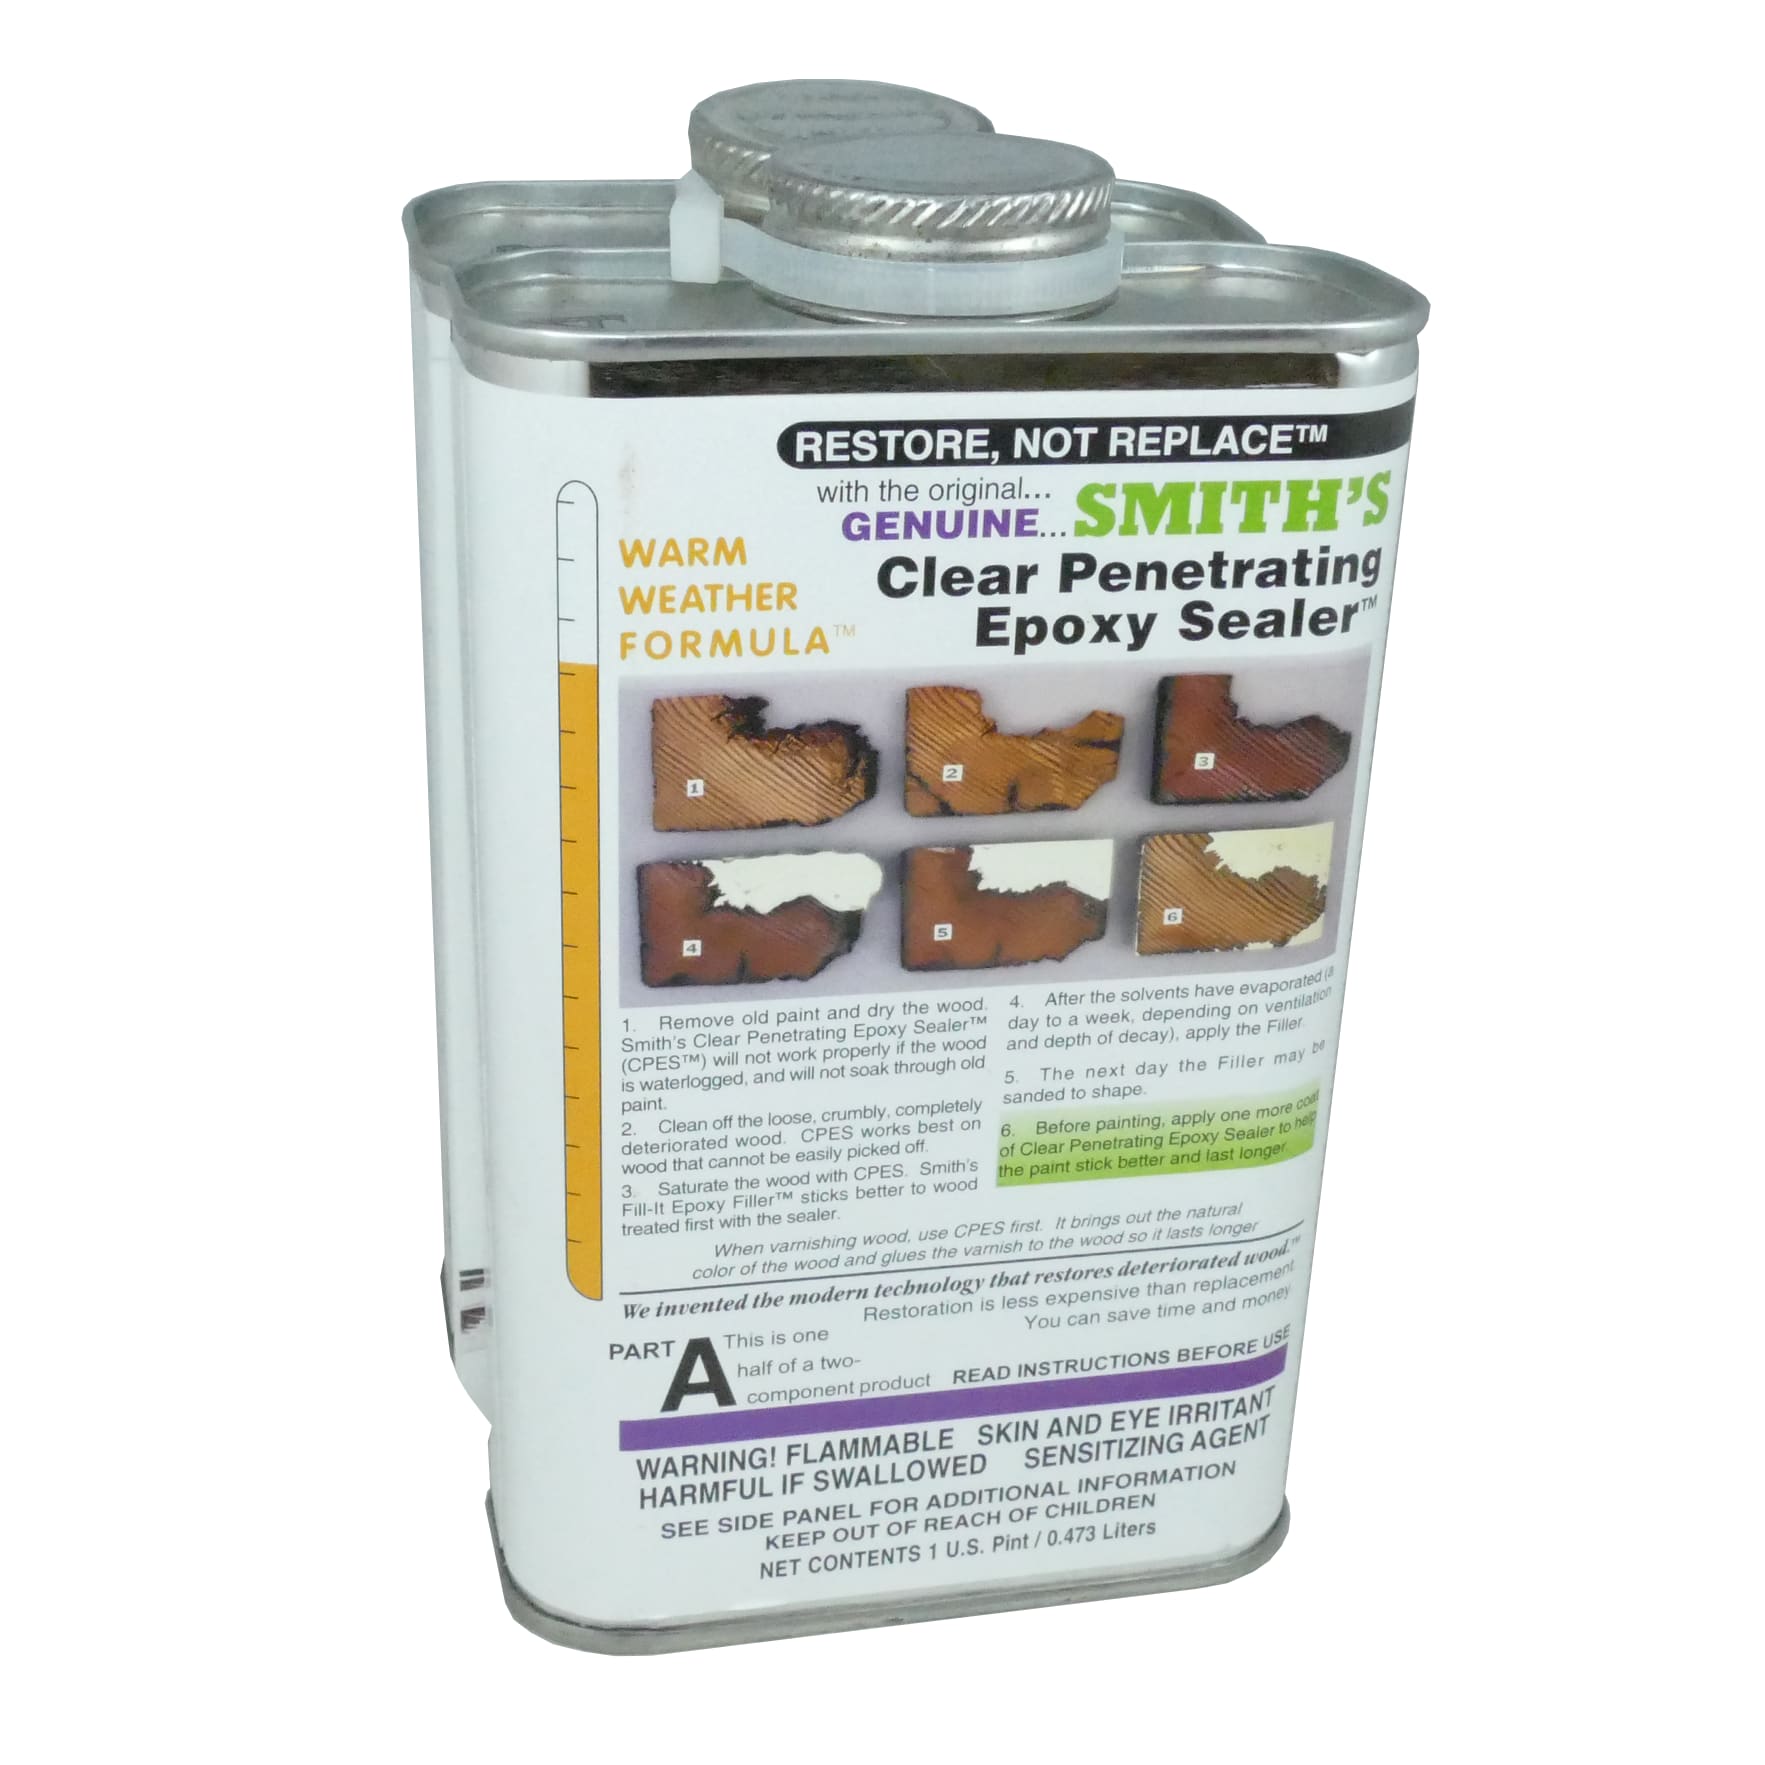 cpes-8 of Smiths Smith's Clear Penetrating Epoxy Sealer - Warm Weather Formula